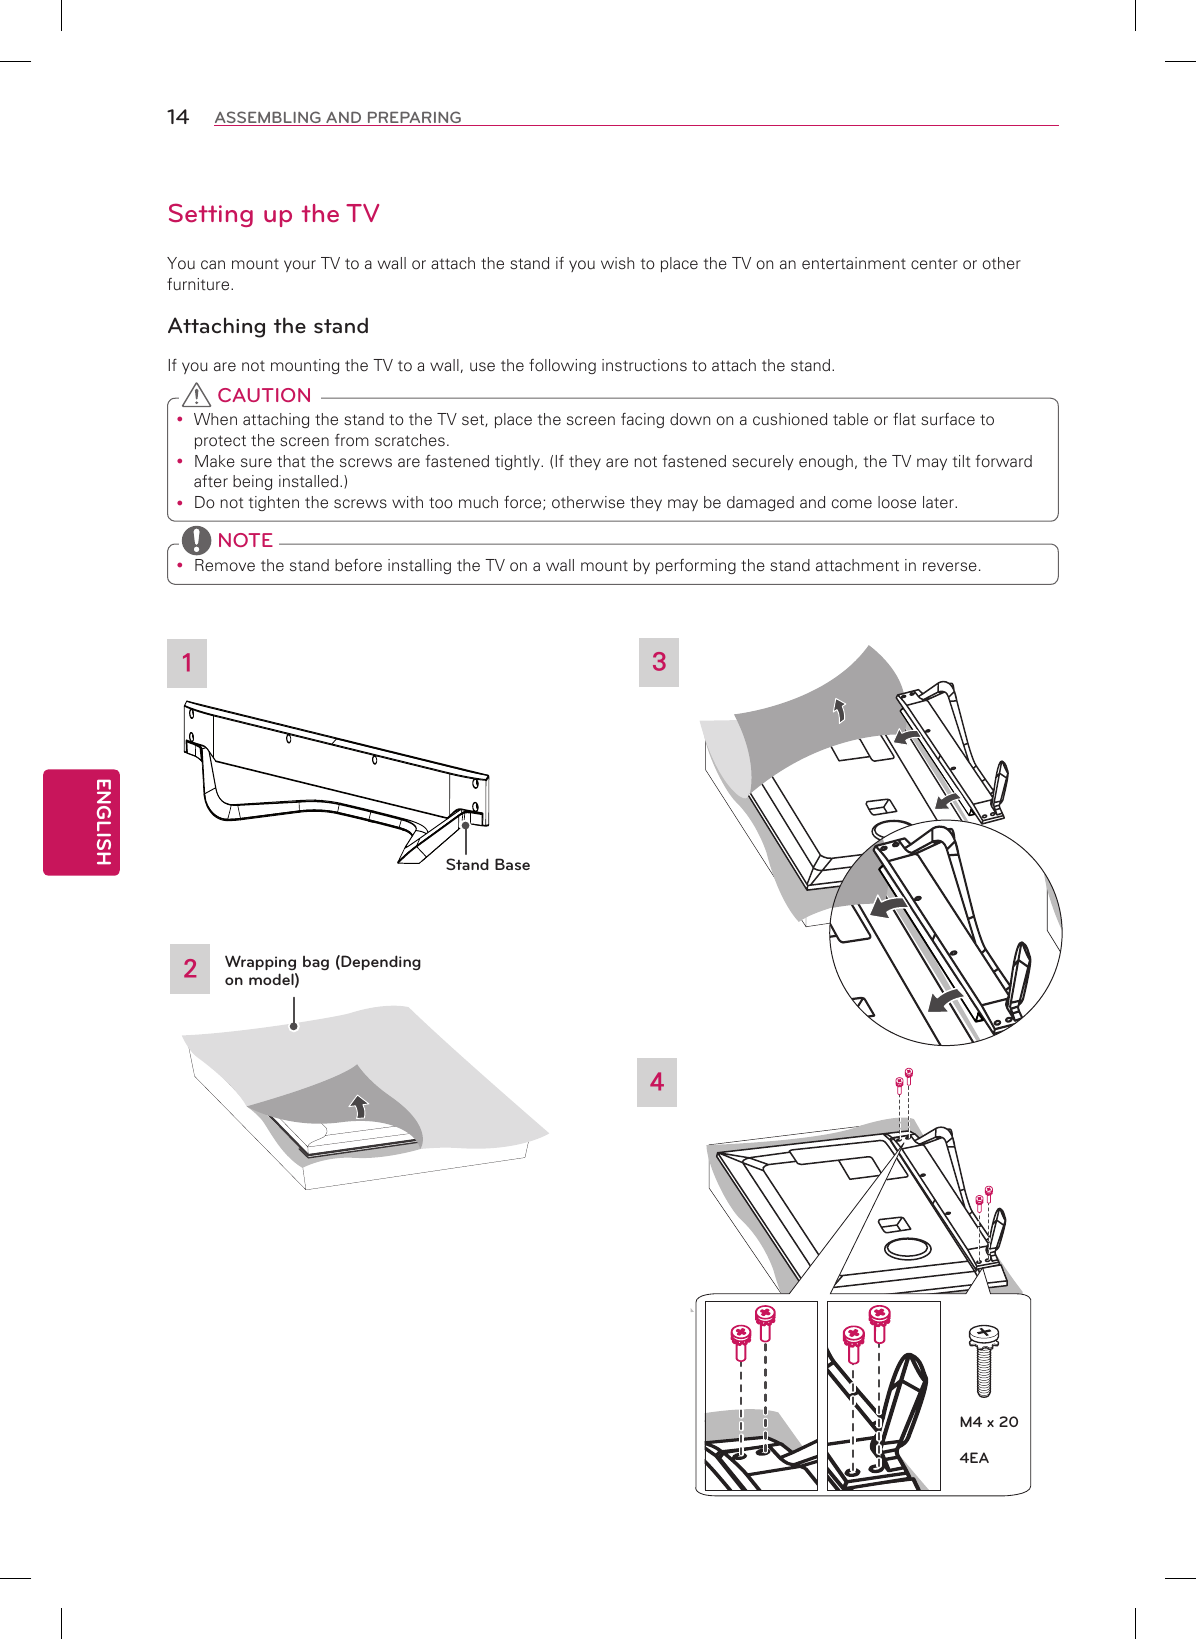 ENGLISH14 ASSEMBLING AND PREPARINGSetting up the TVYou can mount your TV to a wall or attach the stand if you wish to place the TV on an entertainment center or otherfurniture.Attaching the standIf you are not mounting the TV to a wall, use the following instructions to attach the stand. yWhen attaching the stand to the TV set, place the screen facing down on a cushioned table or flat surface to protect the screen from scratches. yMake sure that the screws are fastened tightly. (If they are not fastened securely enough, the TV may tilt forward after being installed.) yDo not tighten the screws with too much force; otherwise they may be damaged and come loose later. CAUTION yRemove the stand before installing the TV on a wall mount by performing the stand attachment in reverse. NOTE324Wrapping bag (Depending on model)1Stand BaseM4 x 204EA